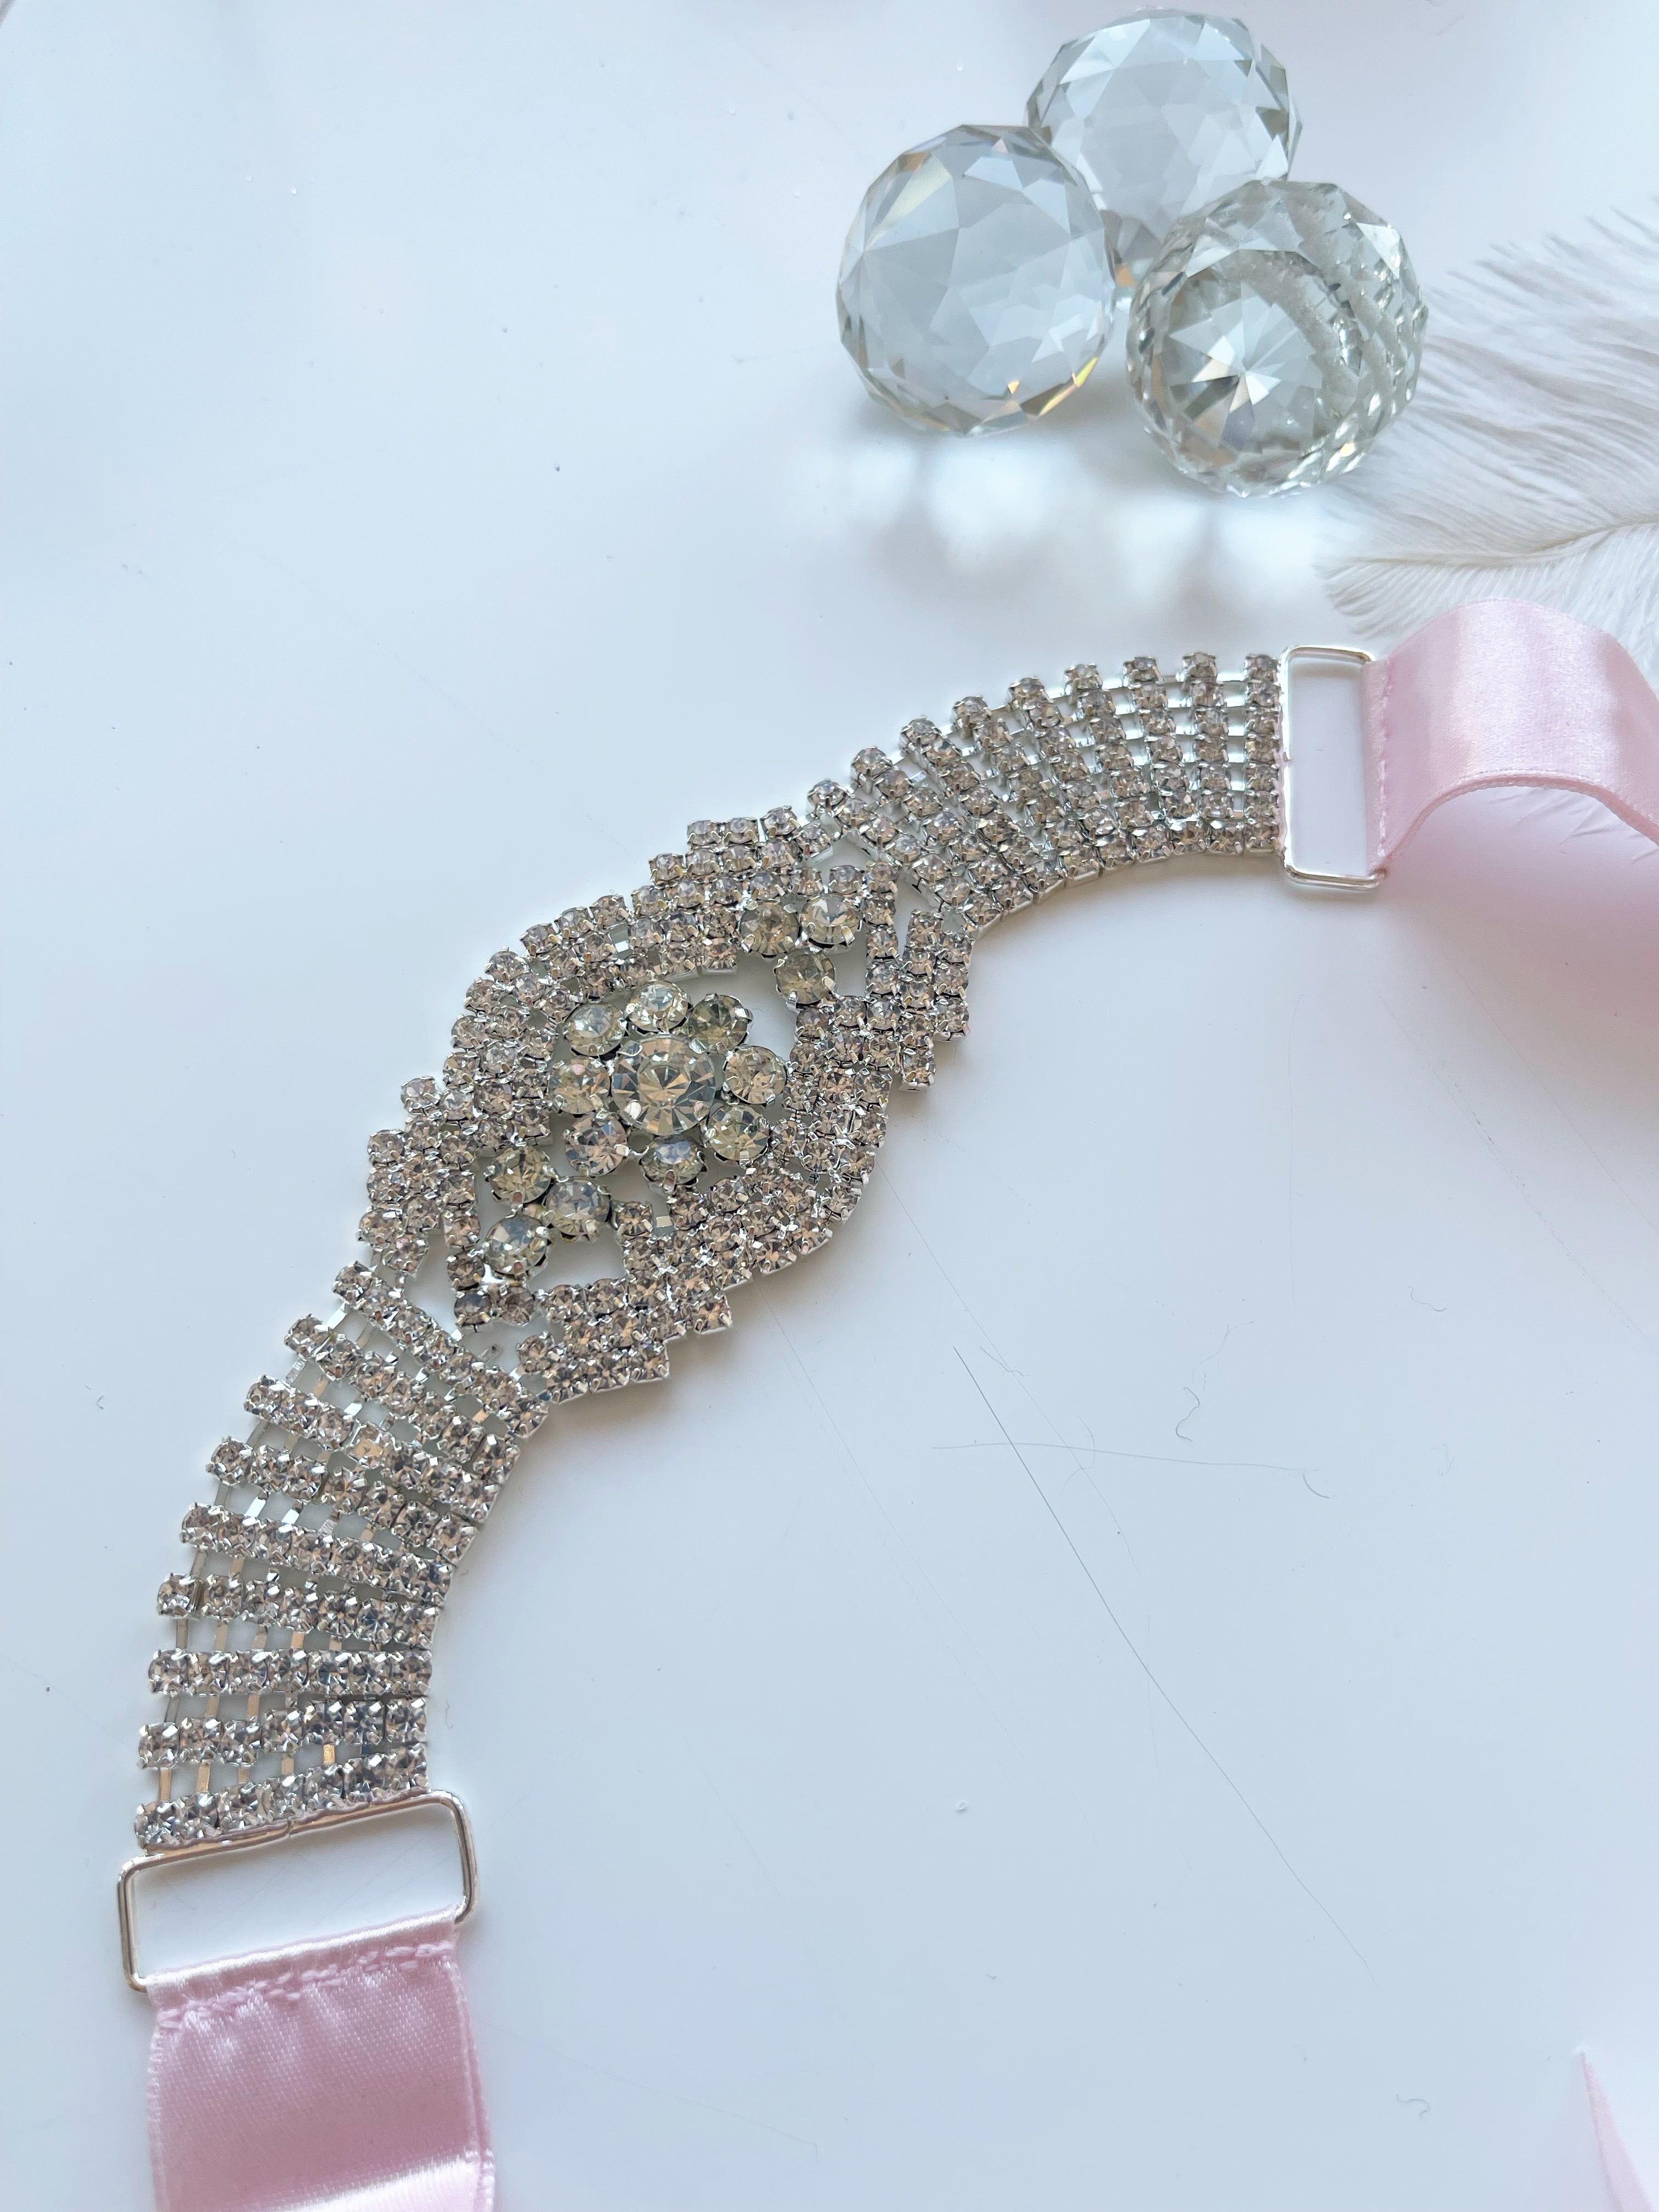 Choker "Cinderella" at the base of the neck with crystals and Pink Satin by Shirley Navone.